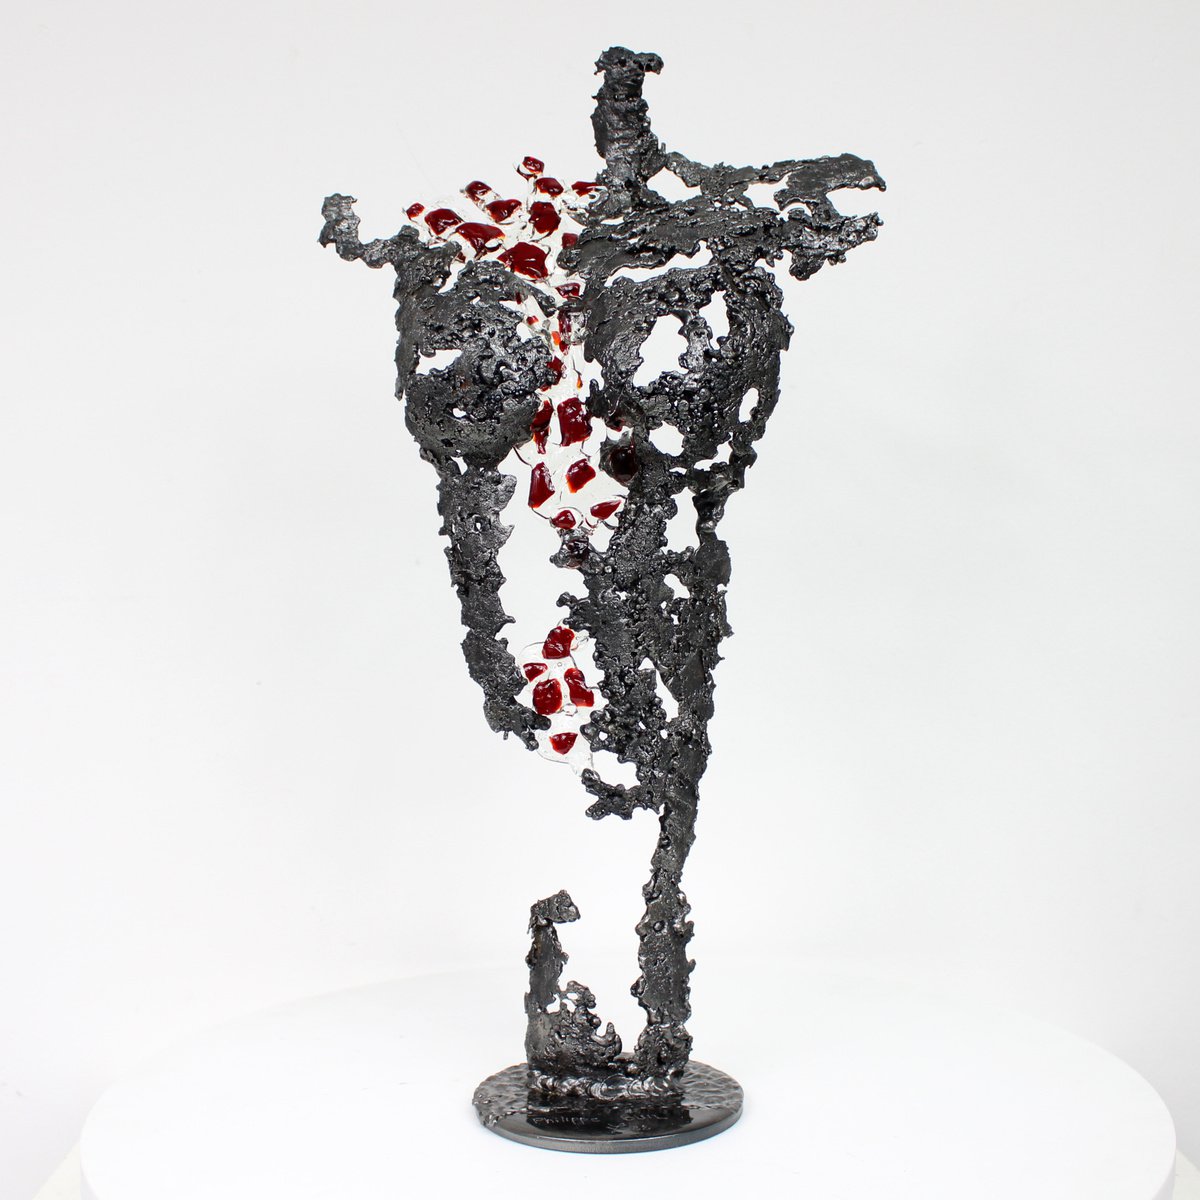 Pavarti Vermillon - Woman body sculpture in metal and glass lace by Philippe Buil